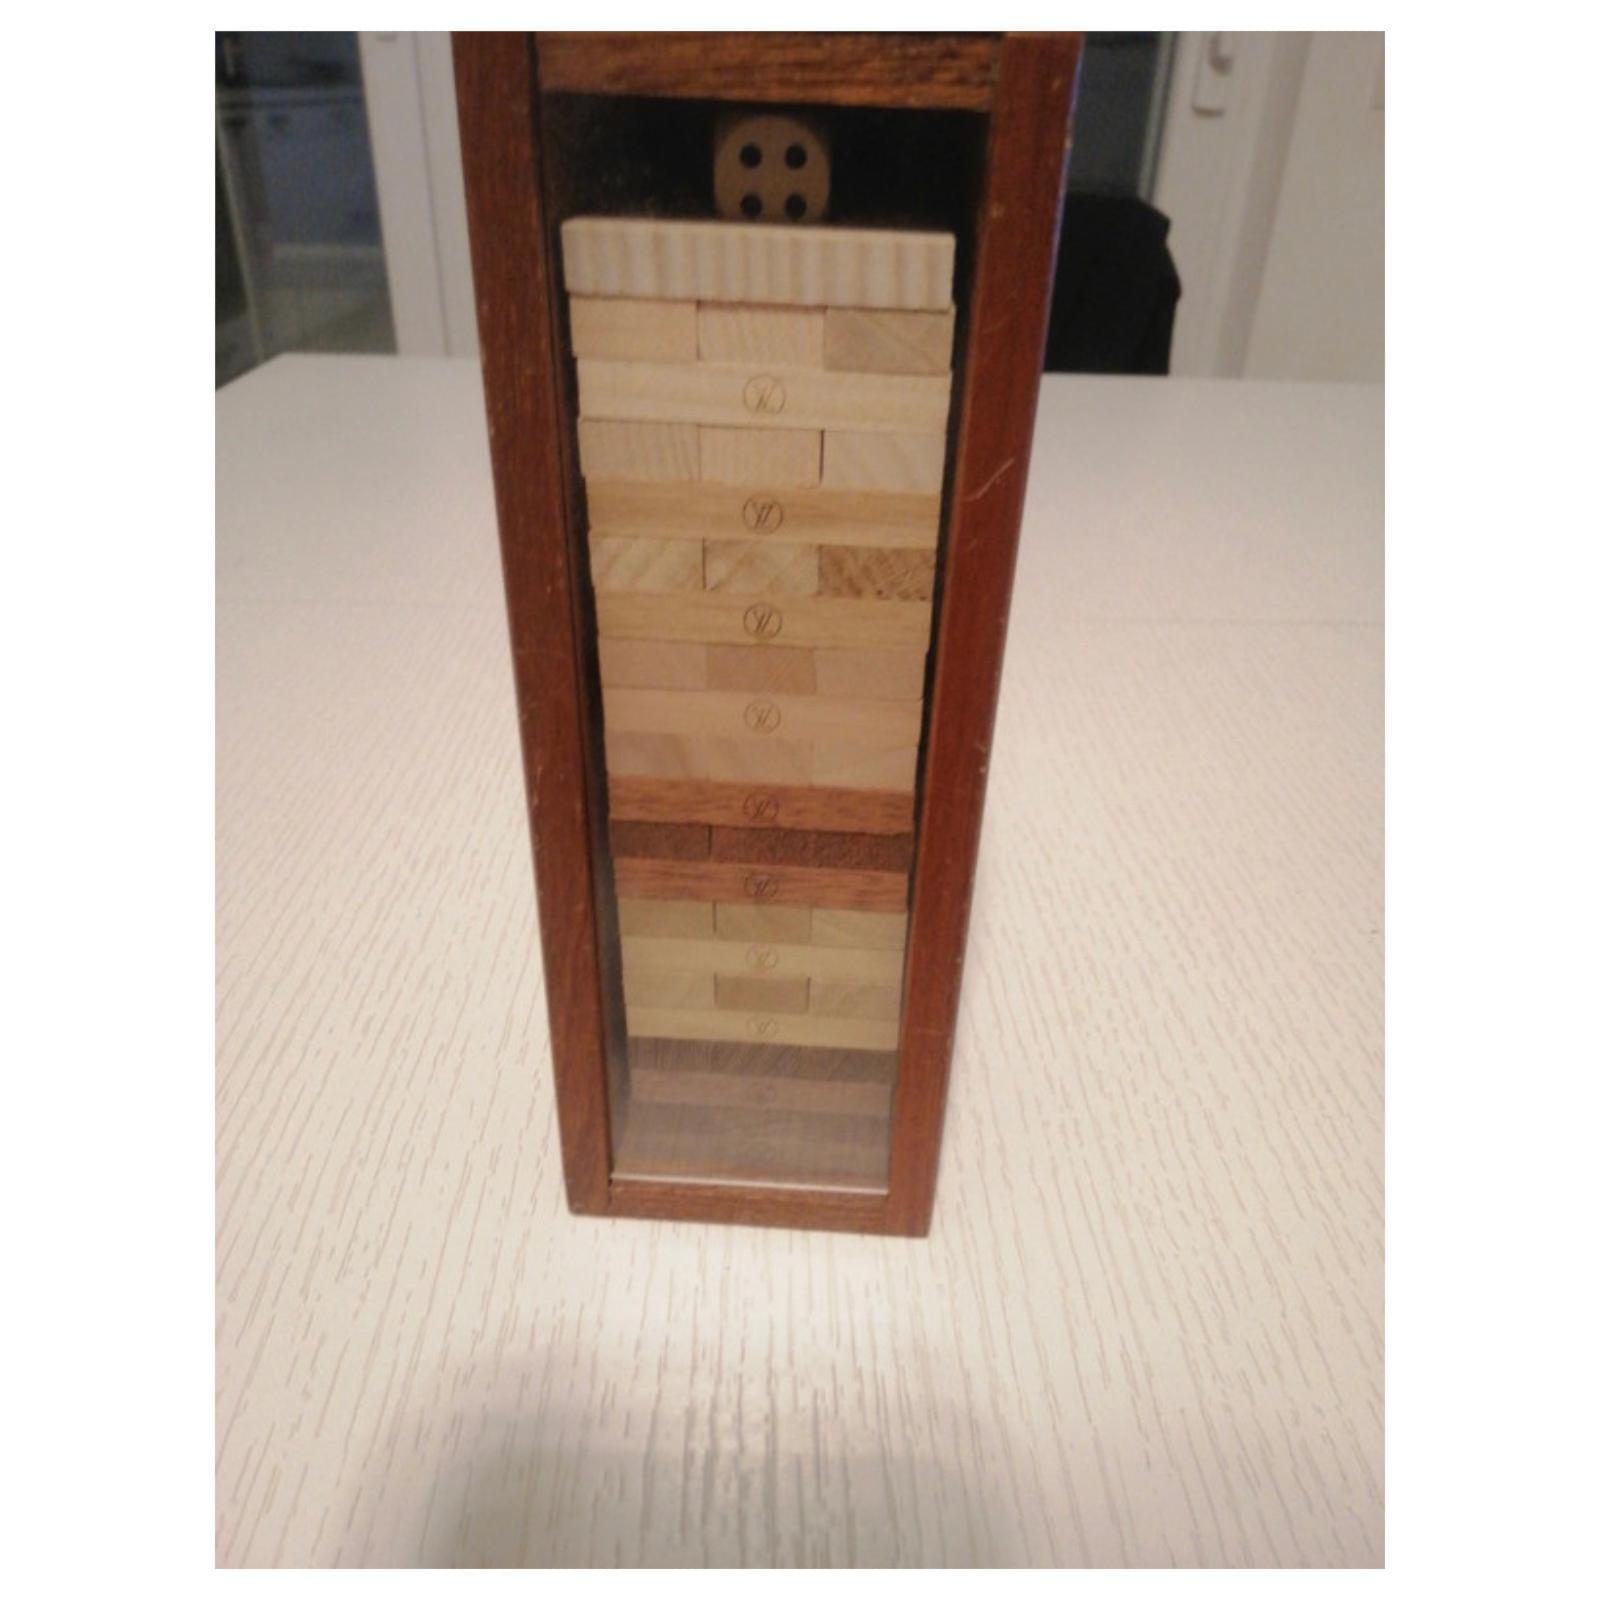 LOUIS VUITTON TOUR WOOD JENGA GAME LIMITED EDITION VIP COLLECTIBLE AND  RARE!!